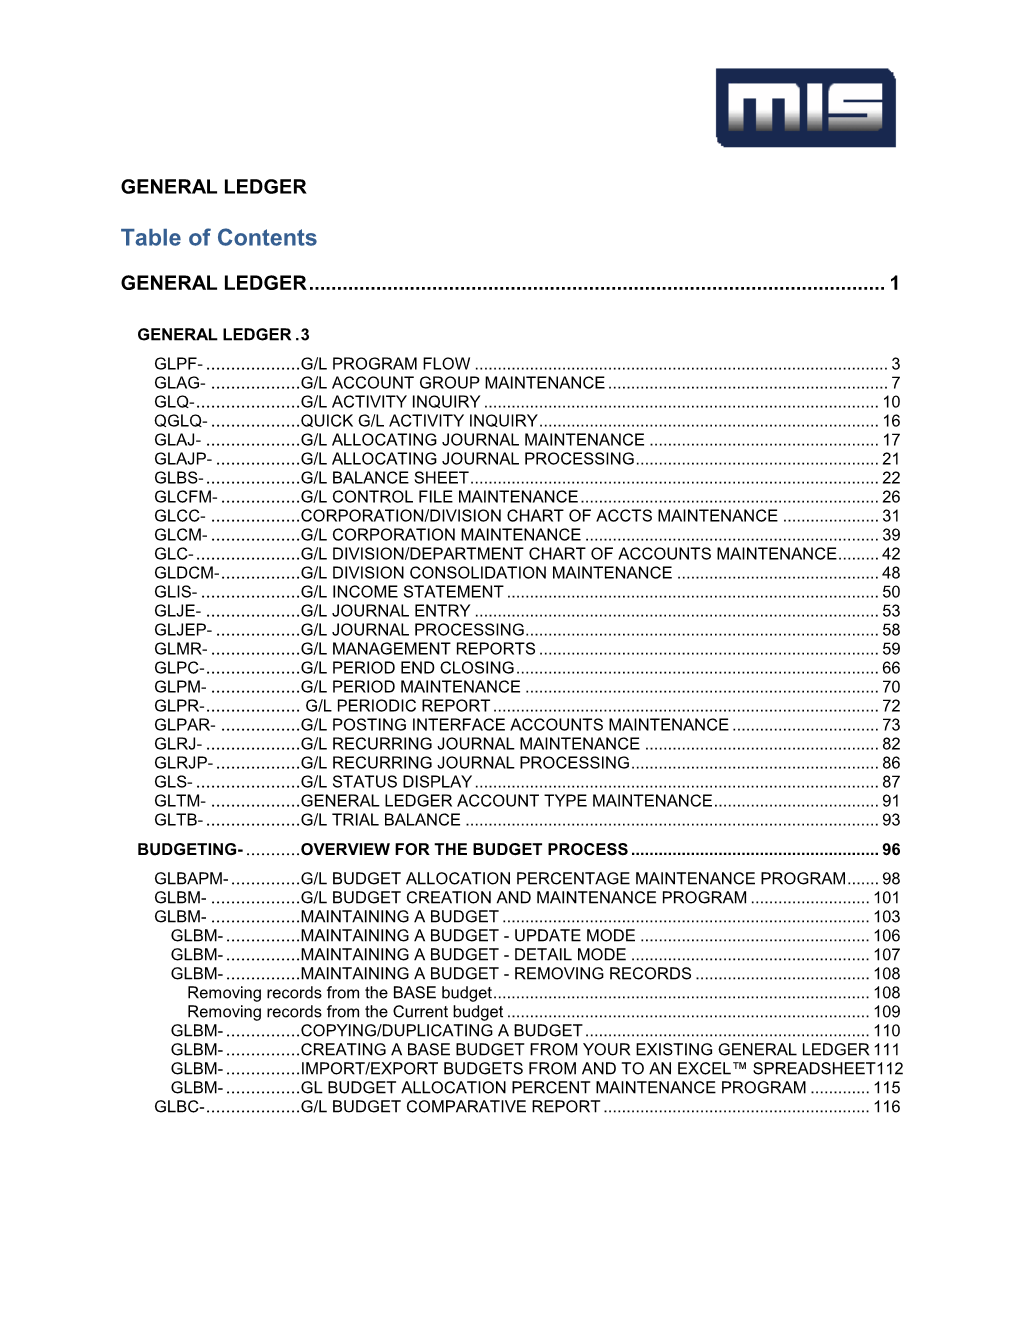 General Ledger Table of Contents